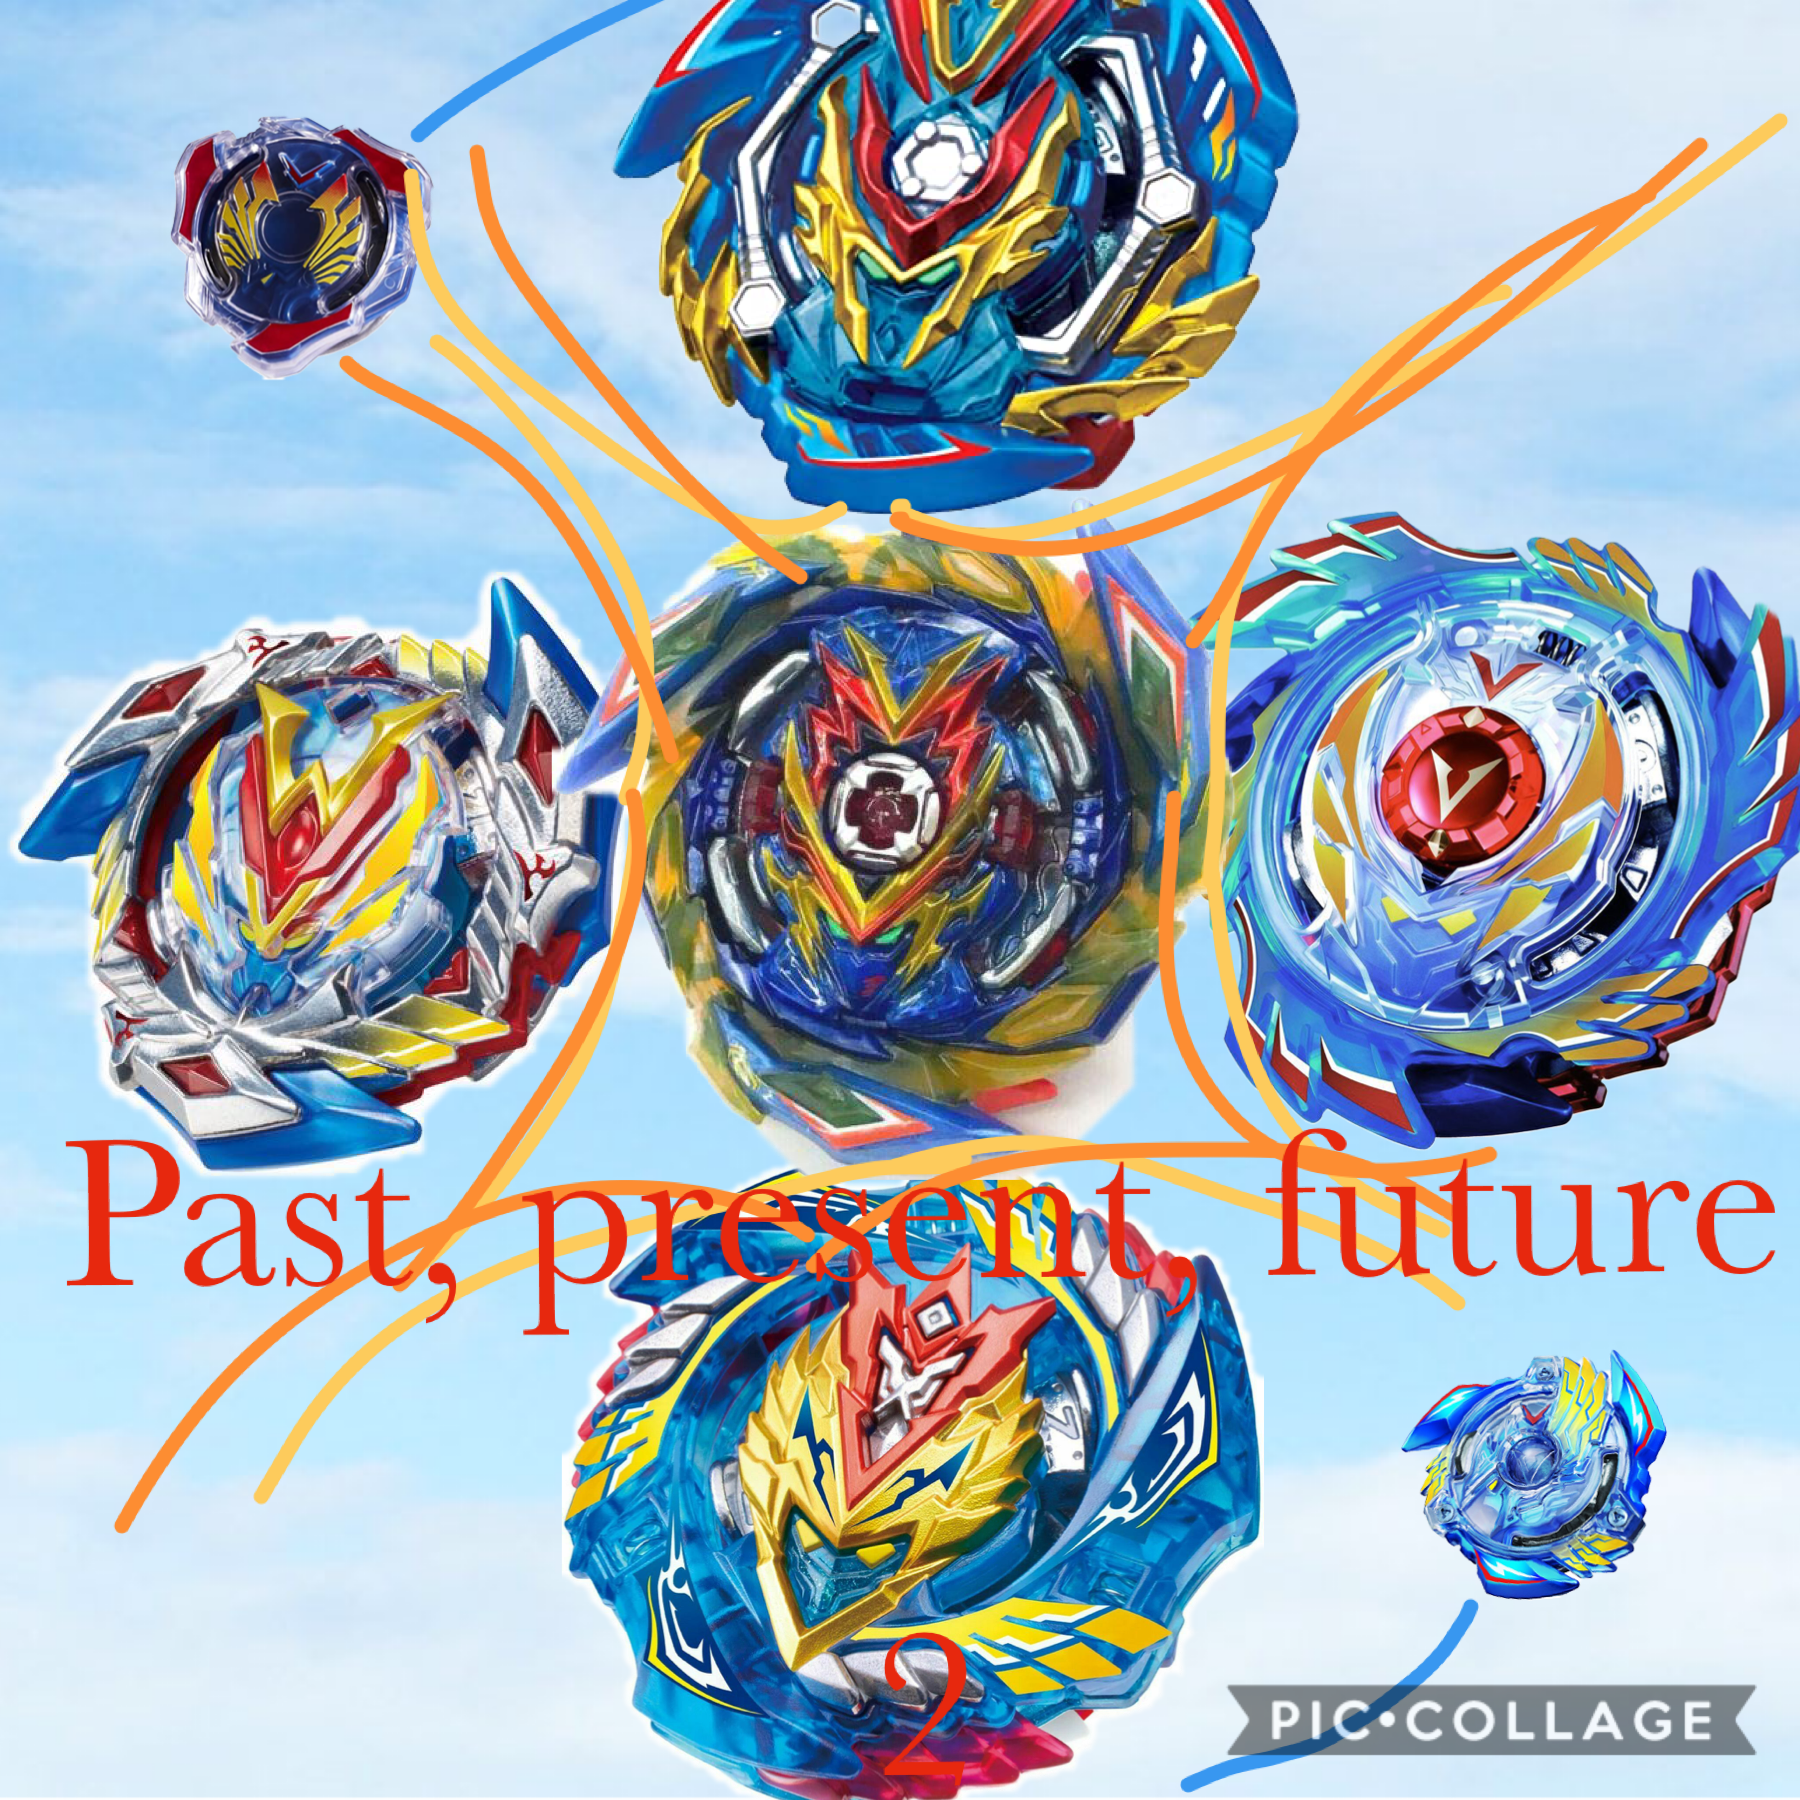 Past, present and future part 2
Has reached the PicCollage community  like, follow and comment.